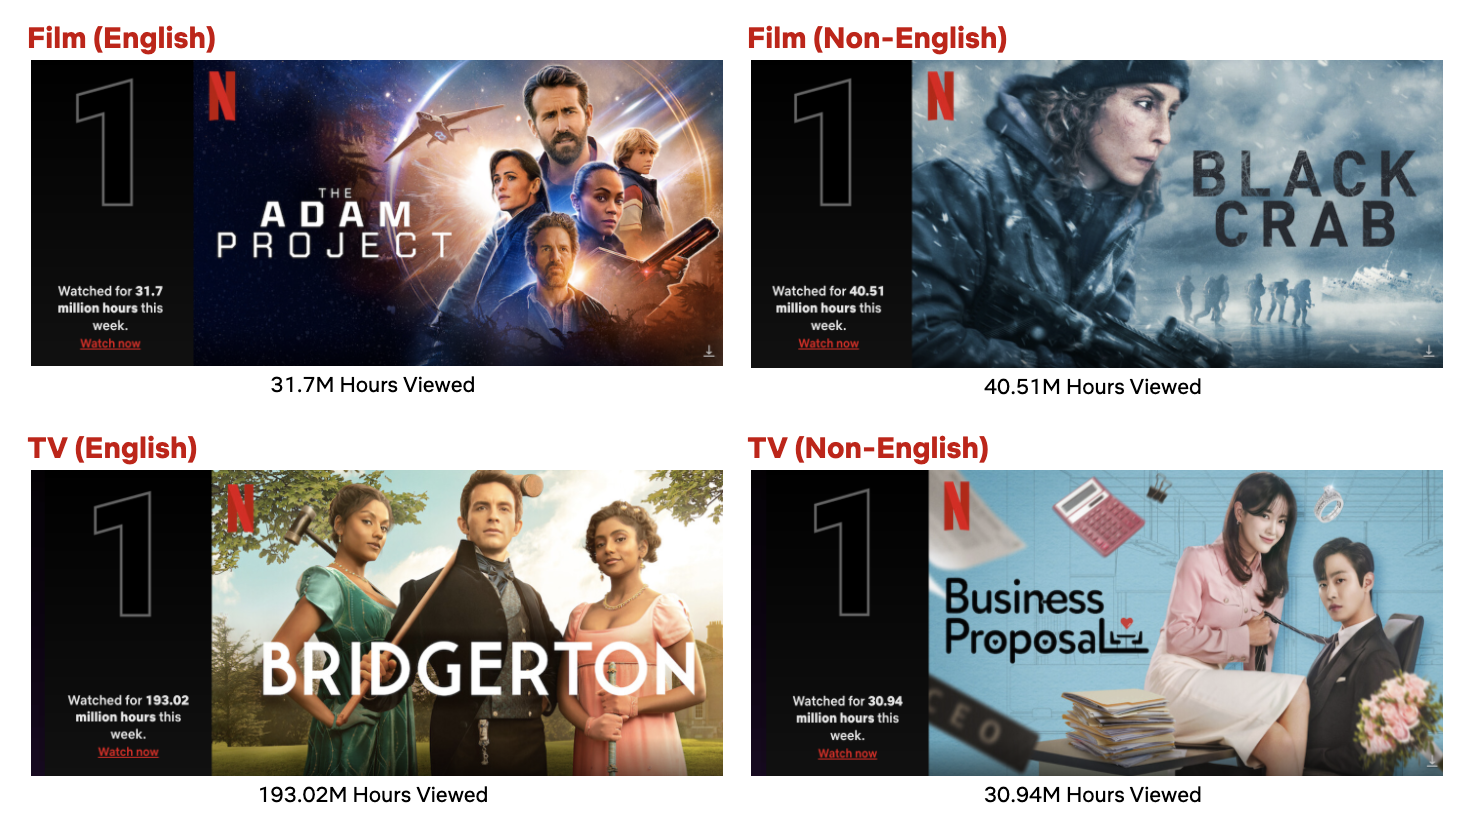 Top 10 Week of Mar 21: ‘Bridgerton’ Is Back and ‘The Adam Project’ Enters the Most Popular List